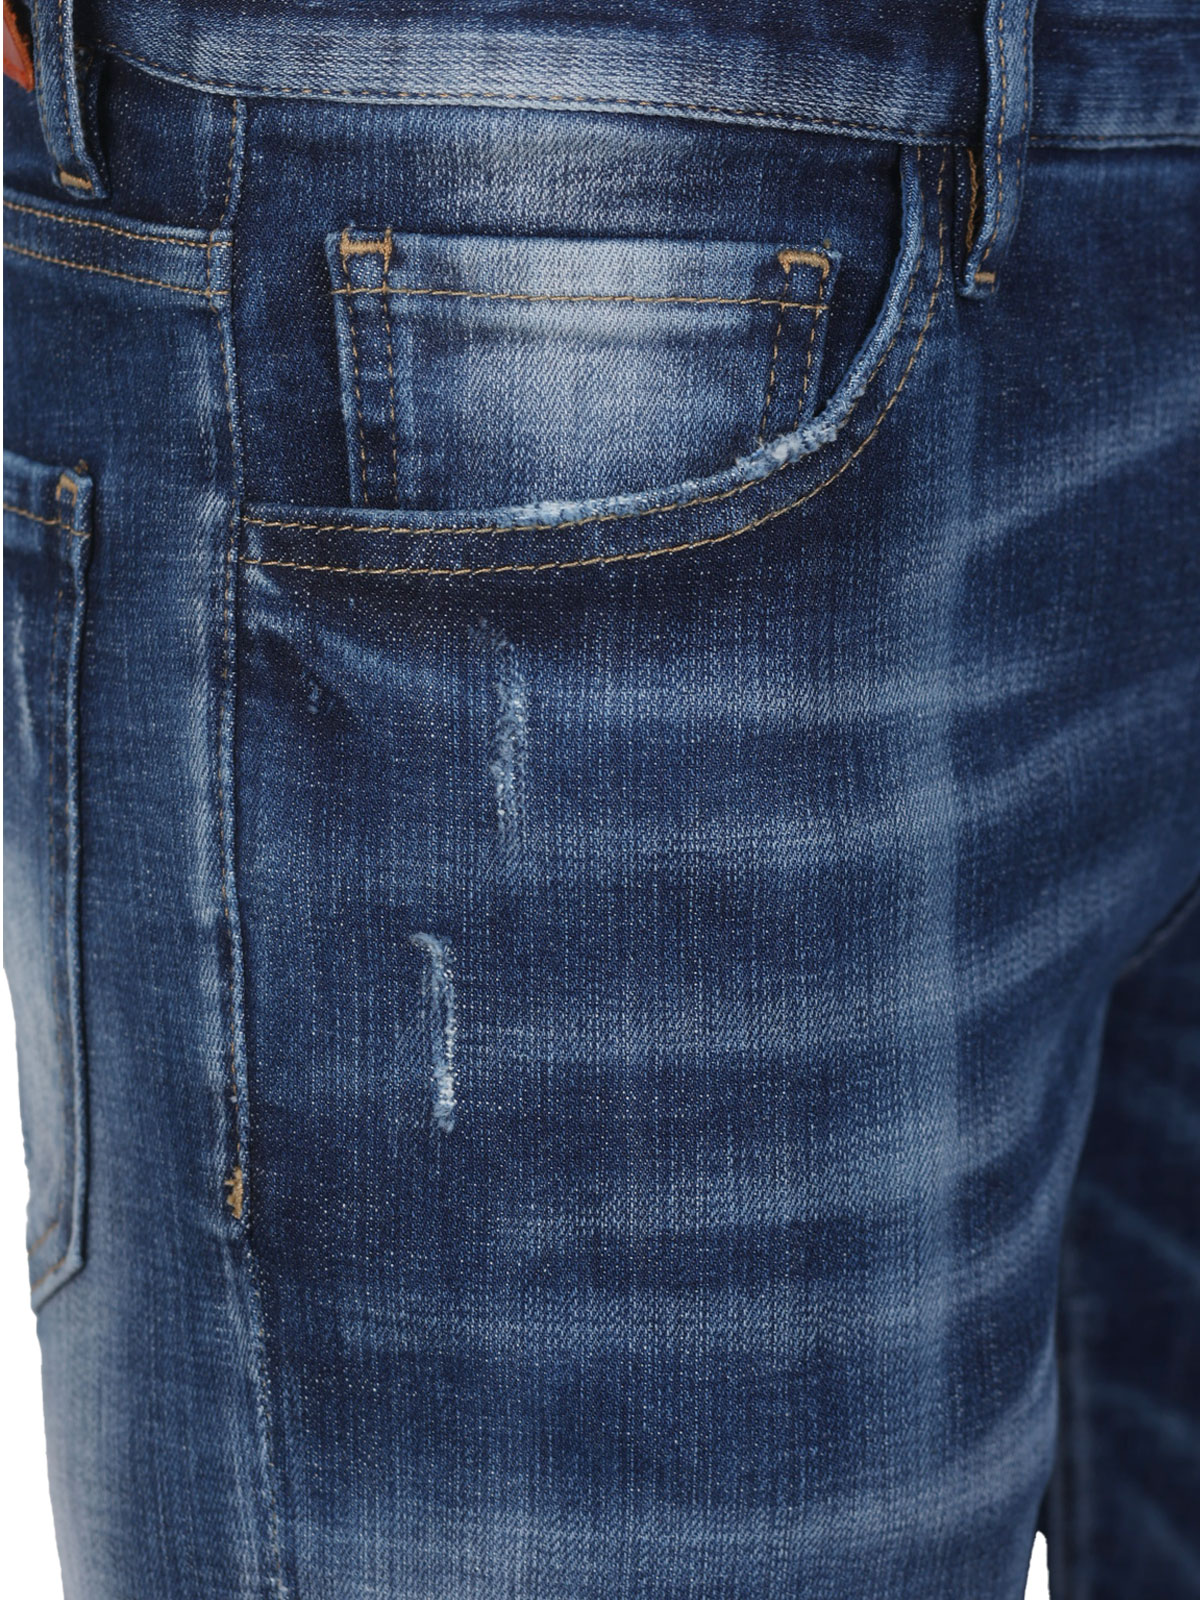 Mens jeans with a ripped effect - 62174 € 78.18 img3